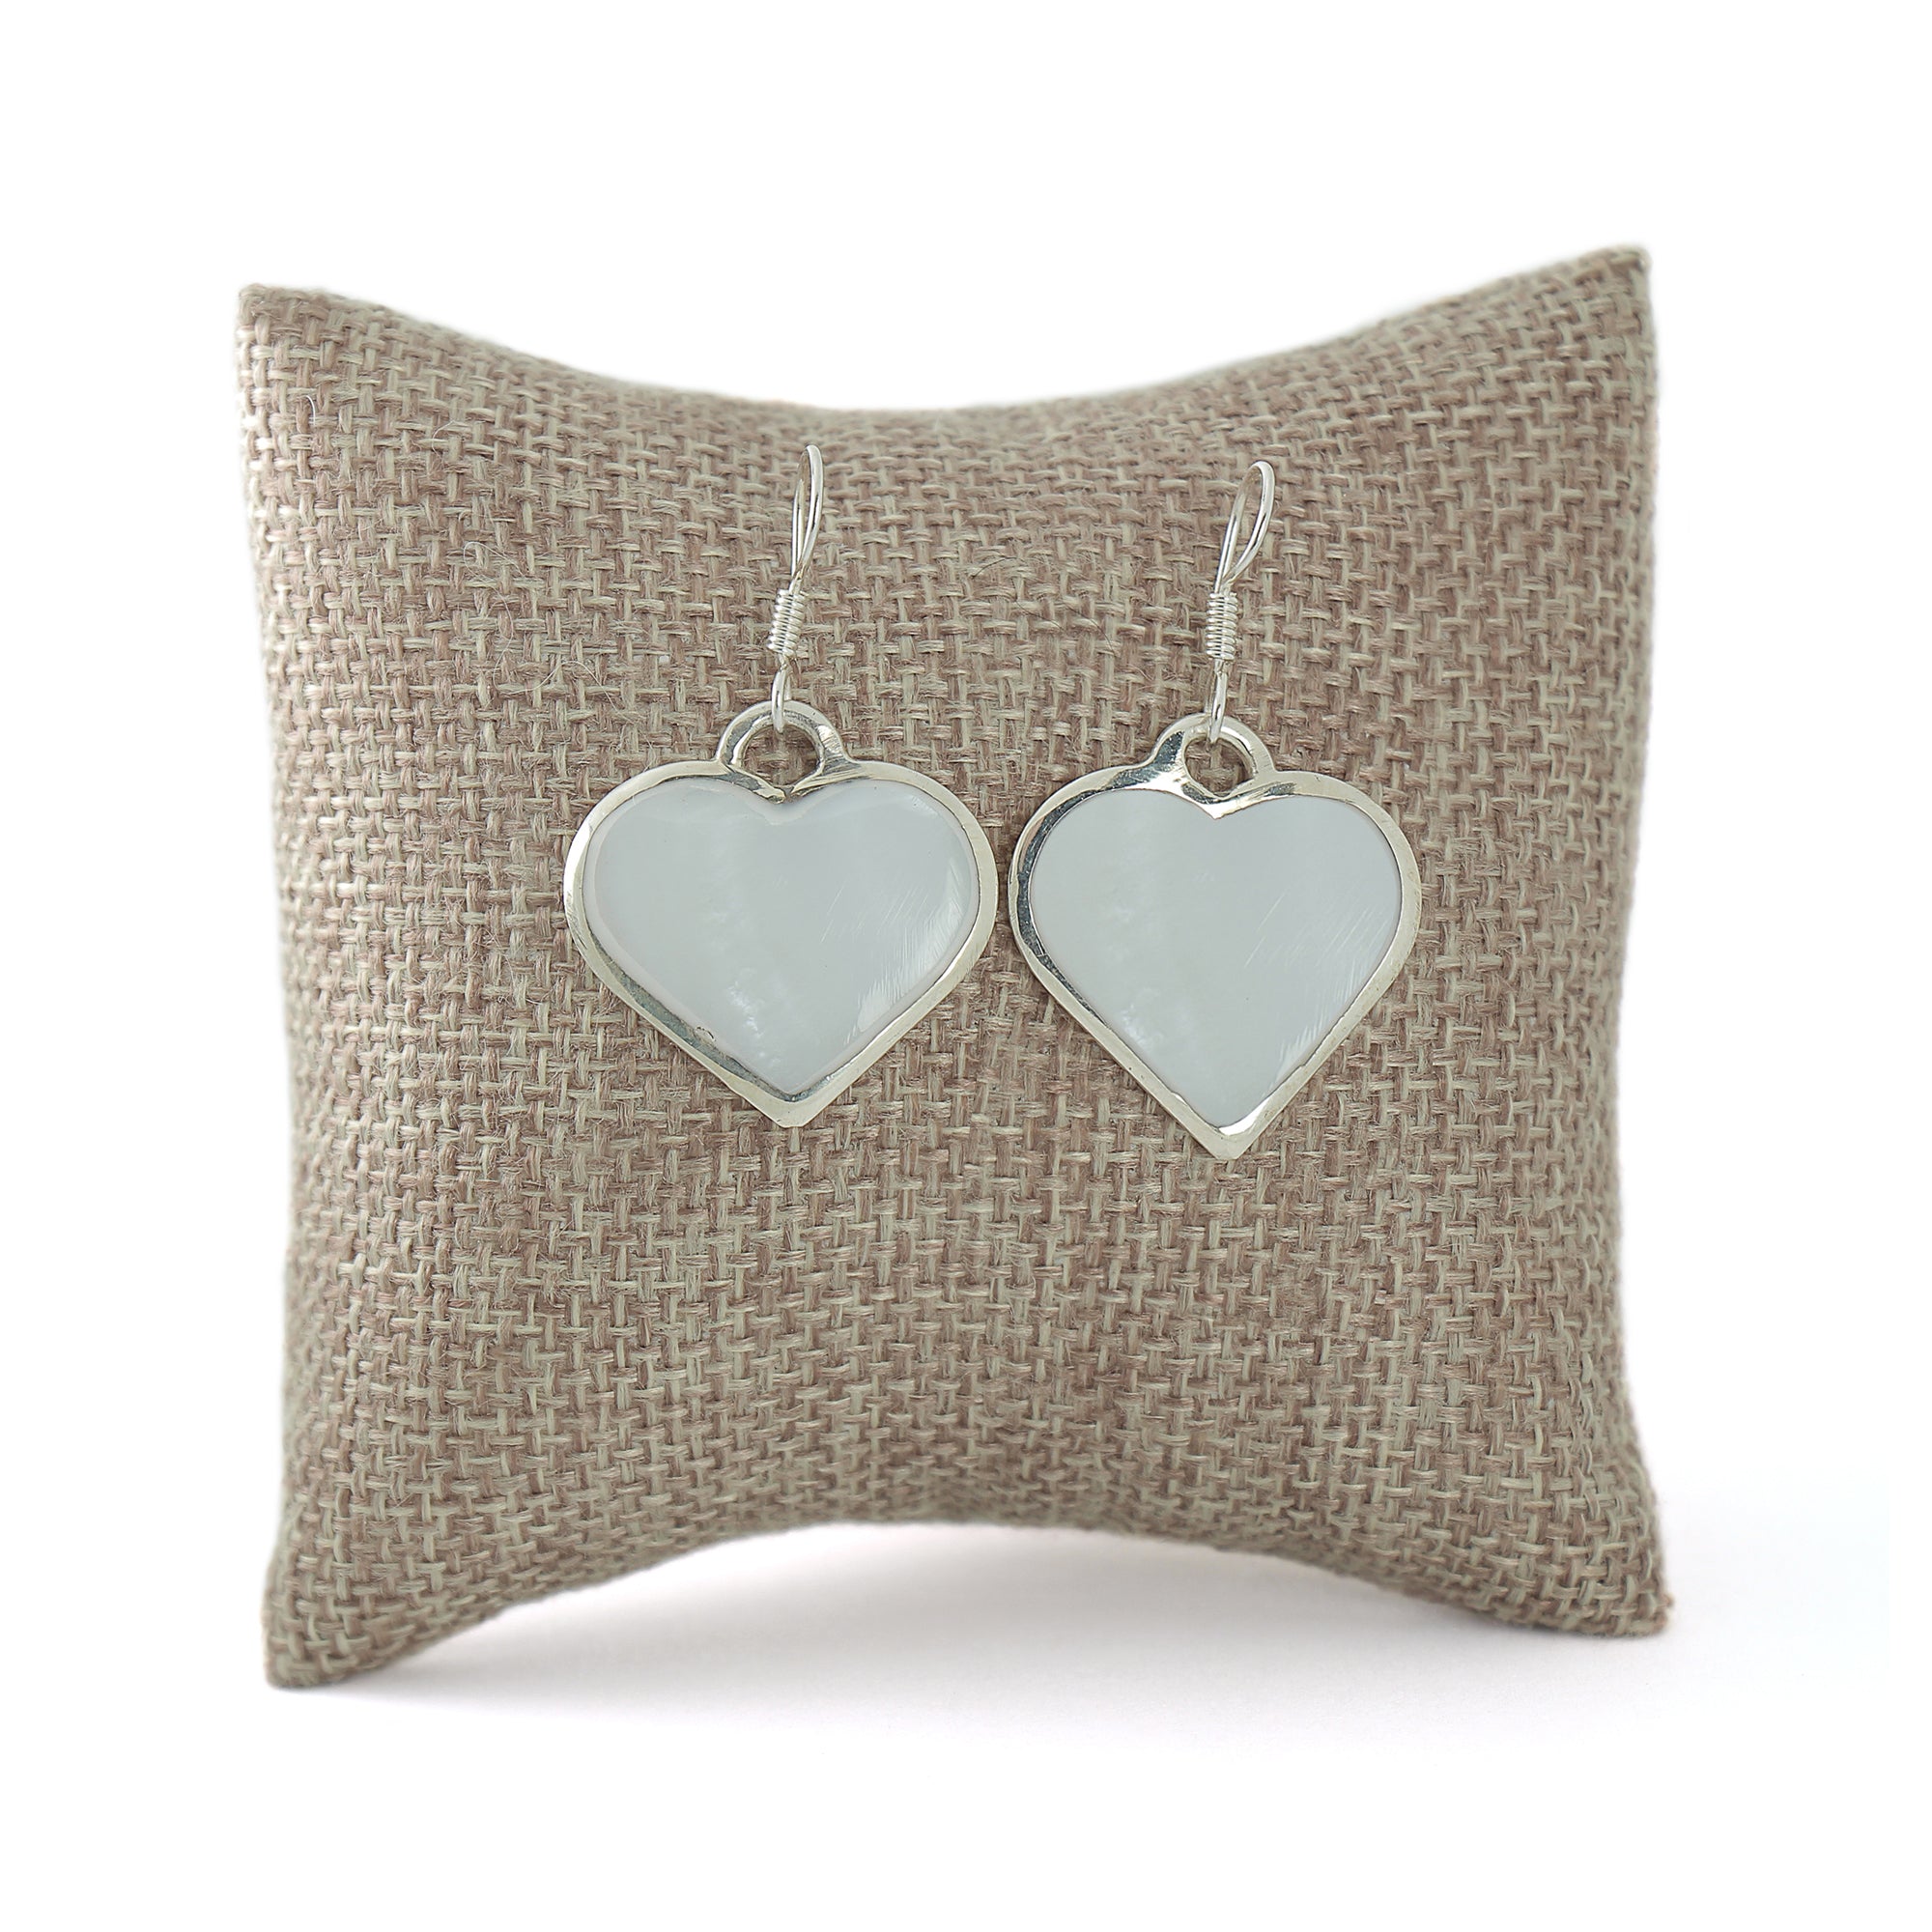 Angelco Accessories Shell heart silver earrings